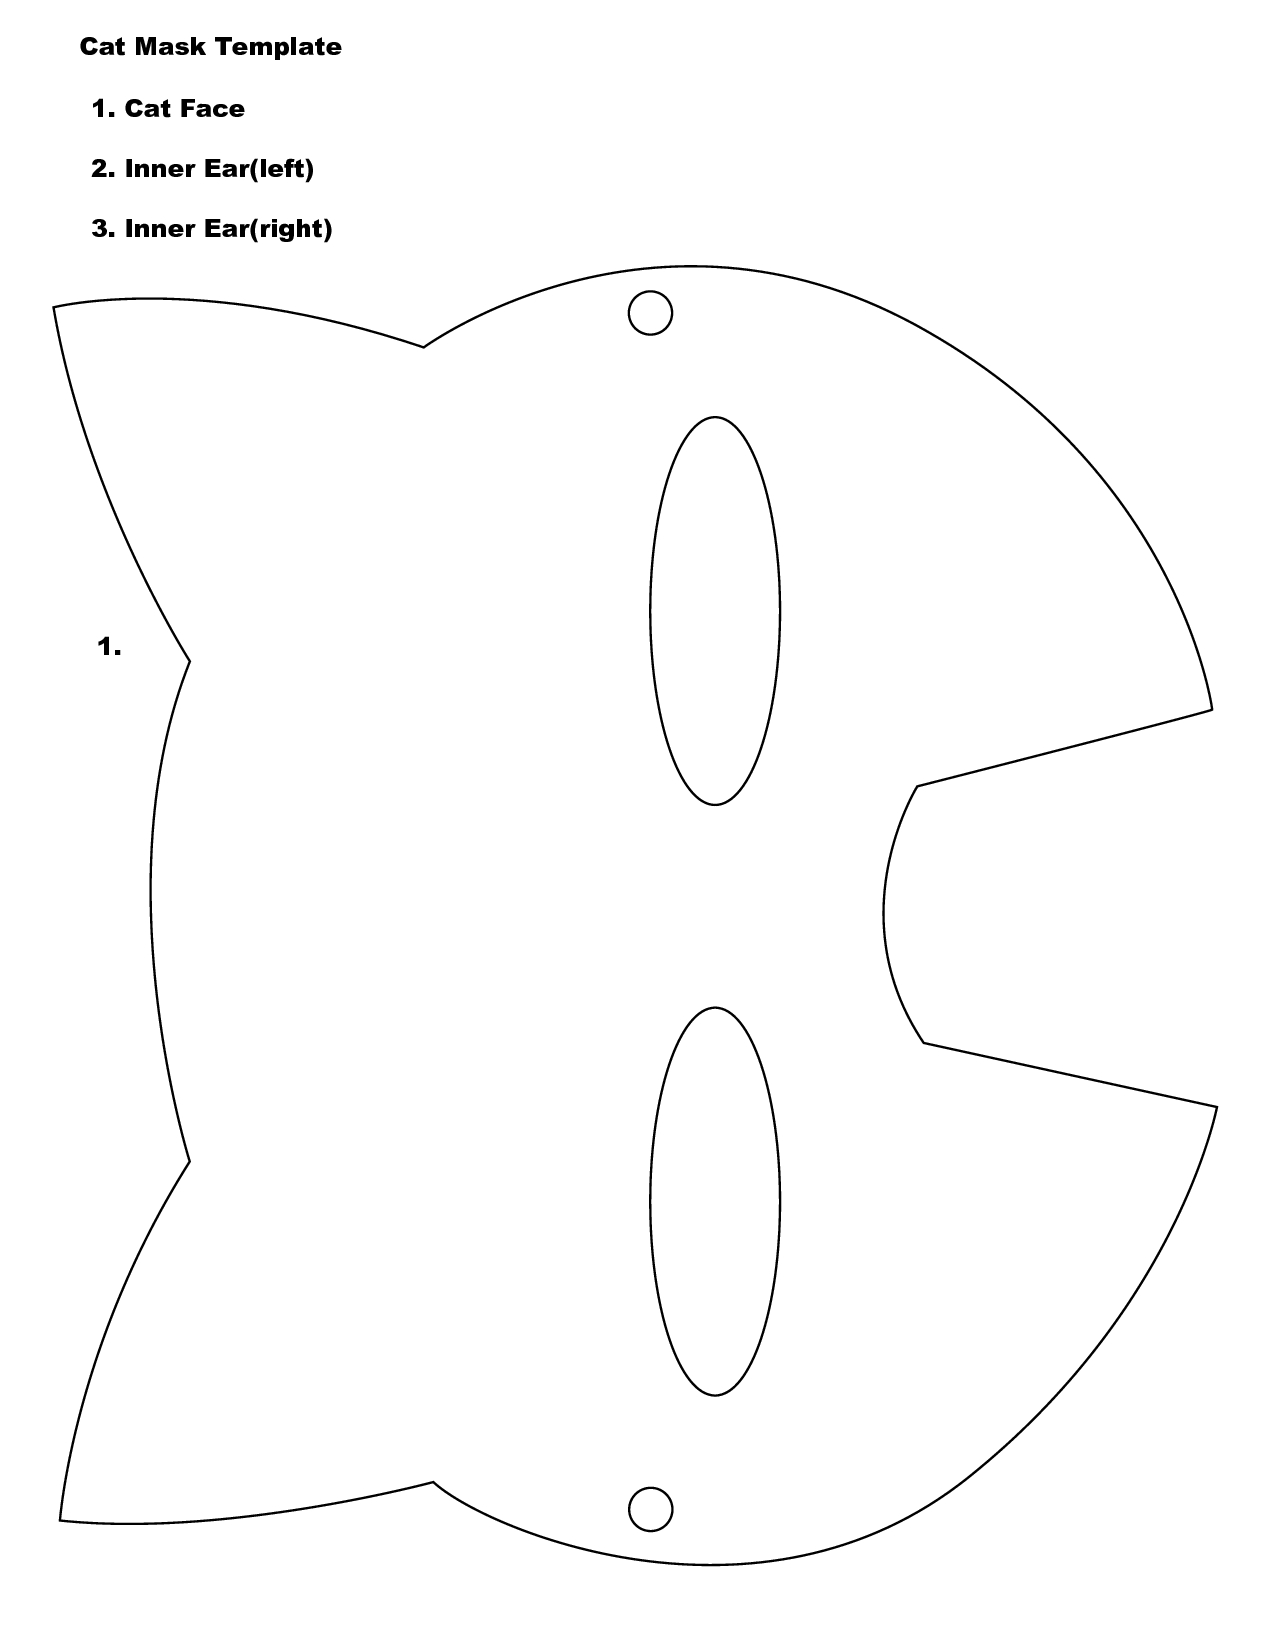 Free Cat Face Template, Download Free Clip Art, Free Clip Art On - Free Printable Halloween Face Masks